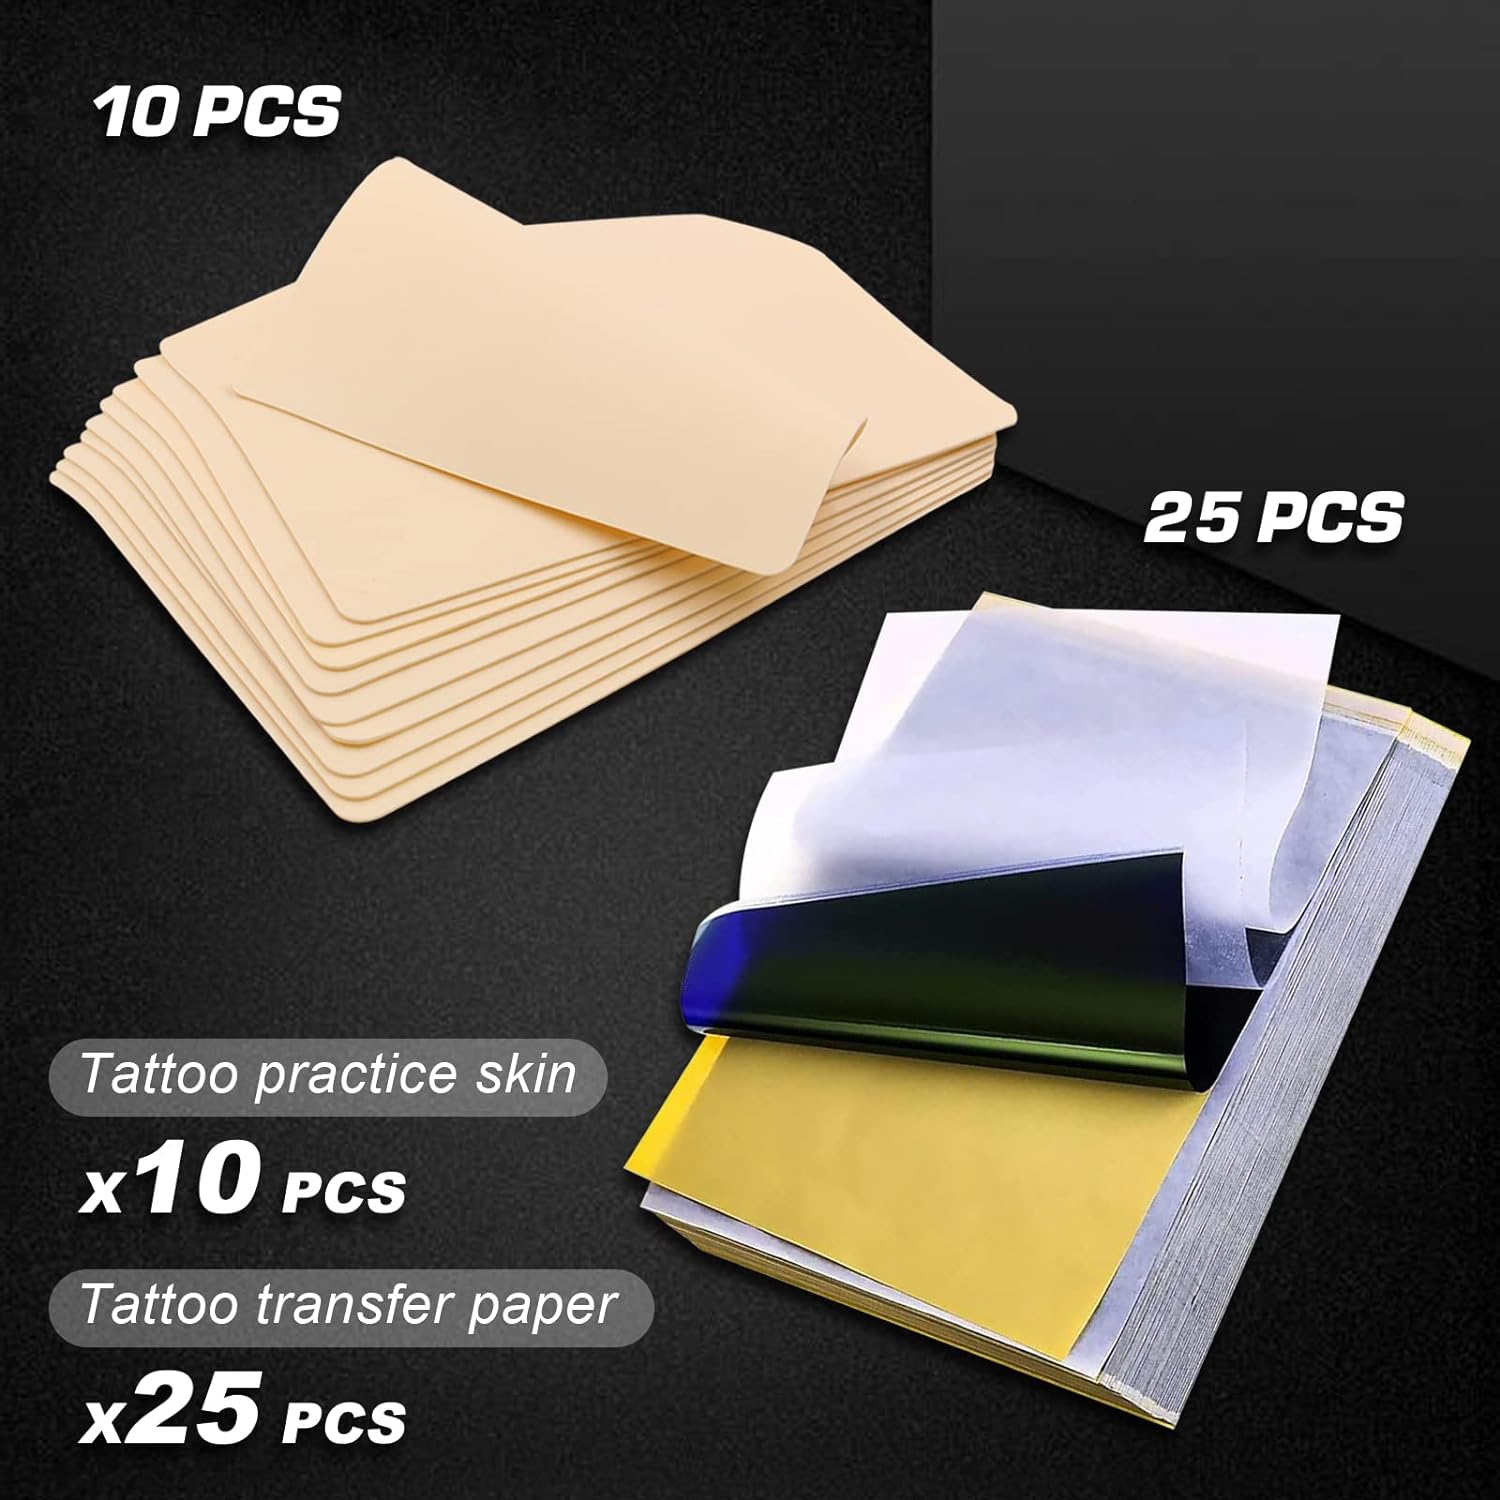 Jconly Tattoo Practice Skin & Transfer Paper Double-Sided Bundle - 35pcs